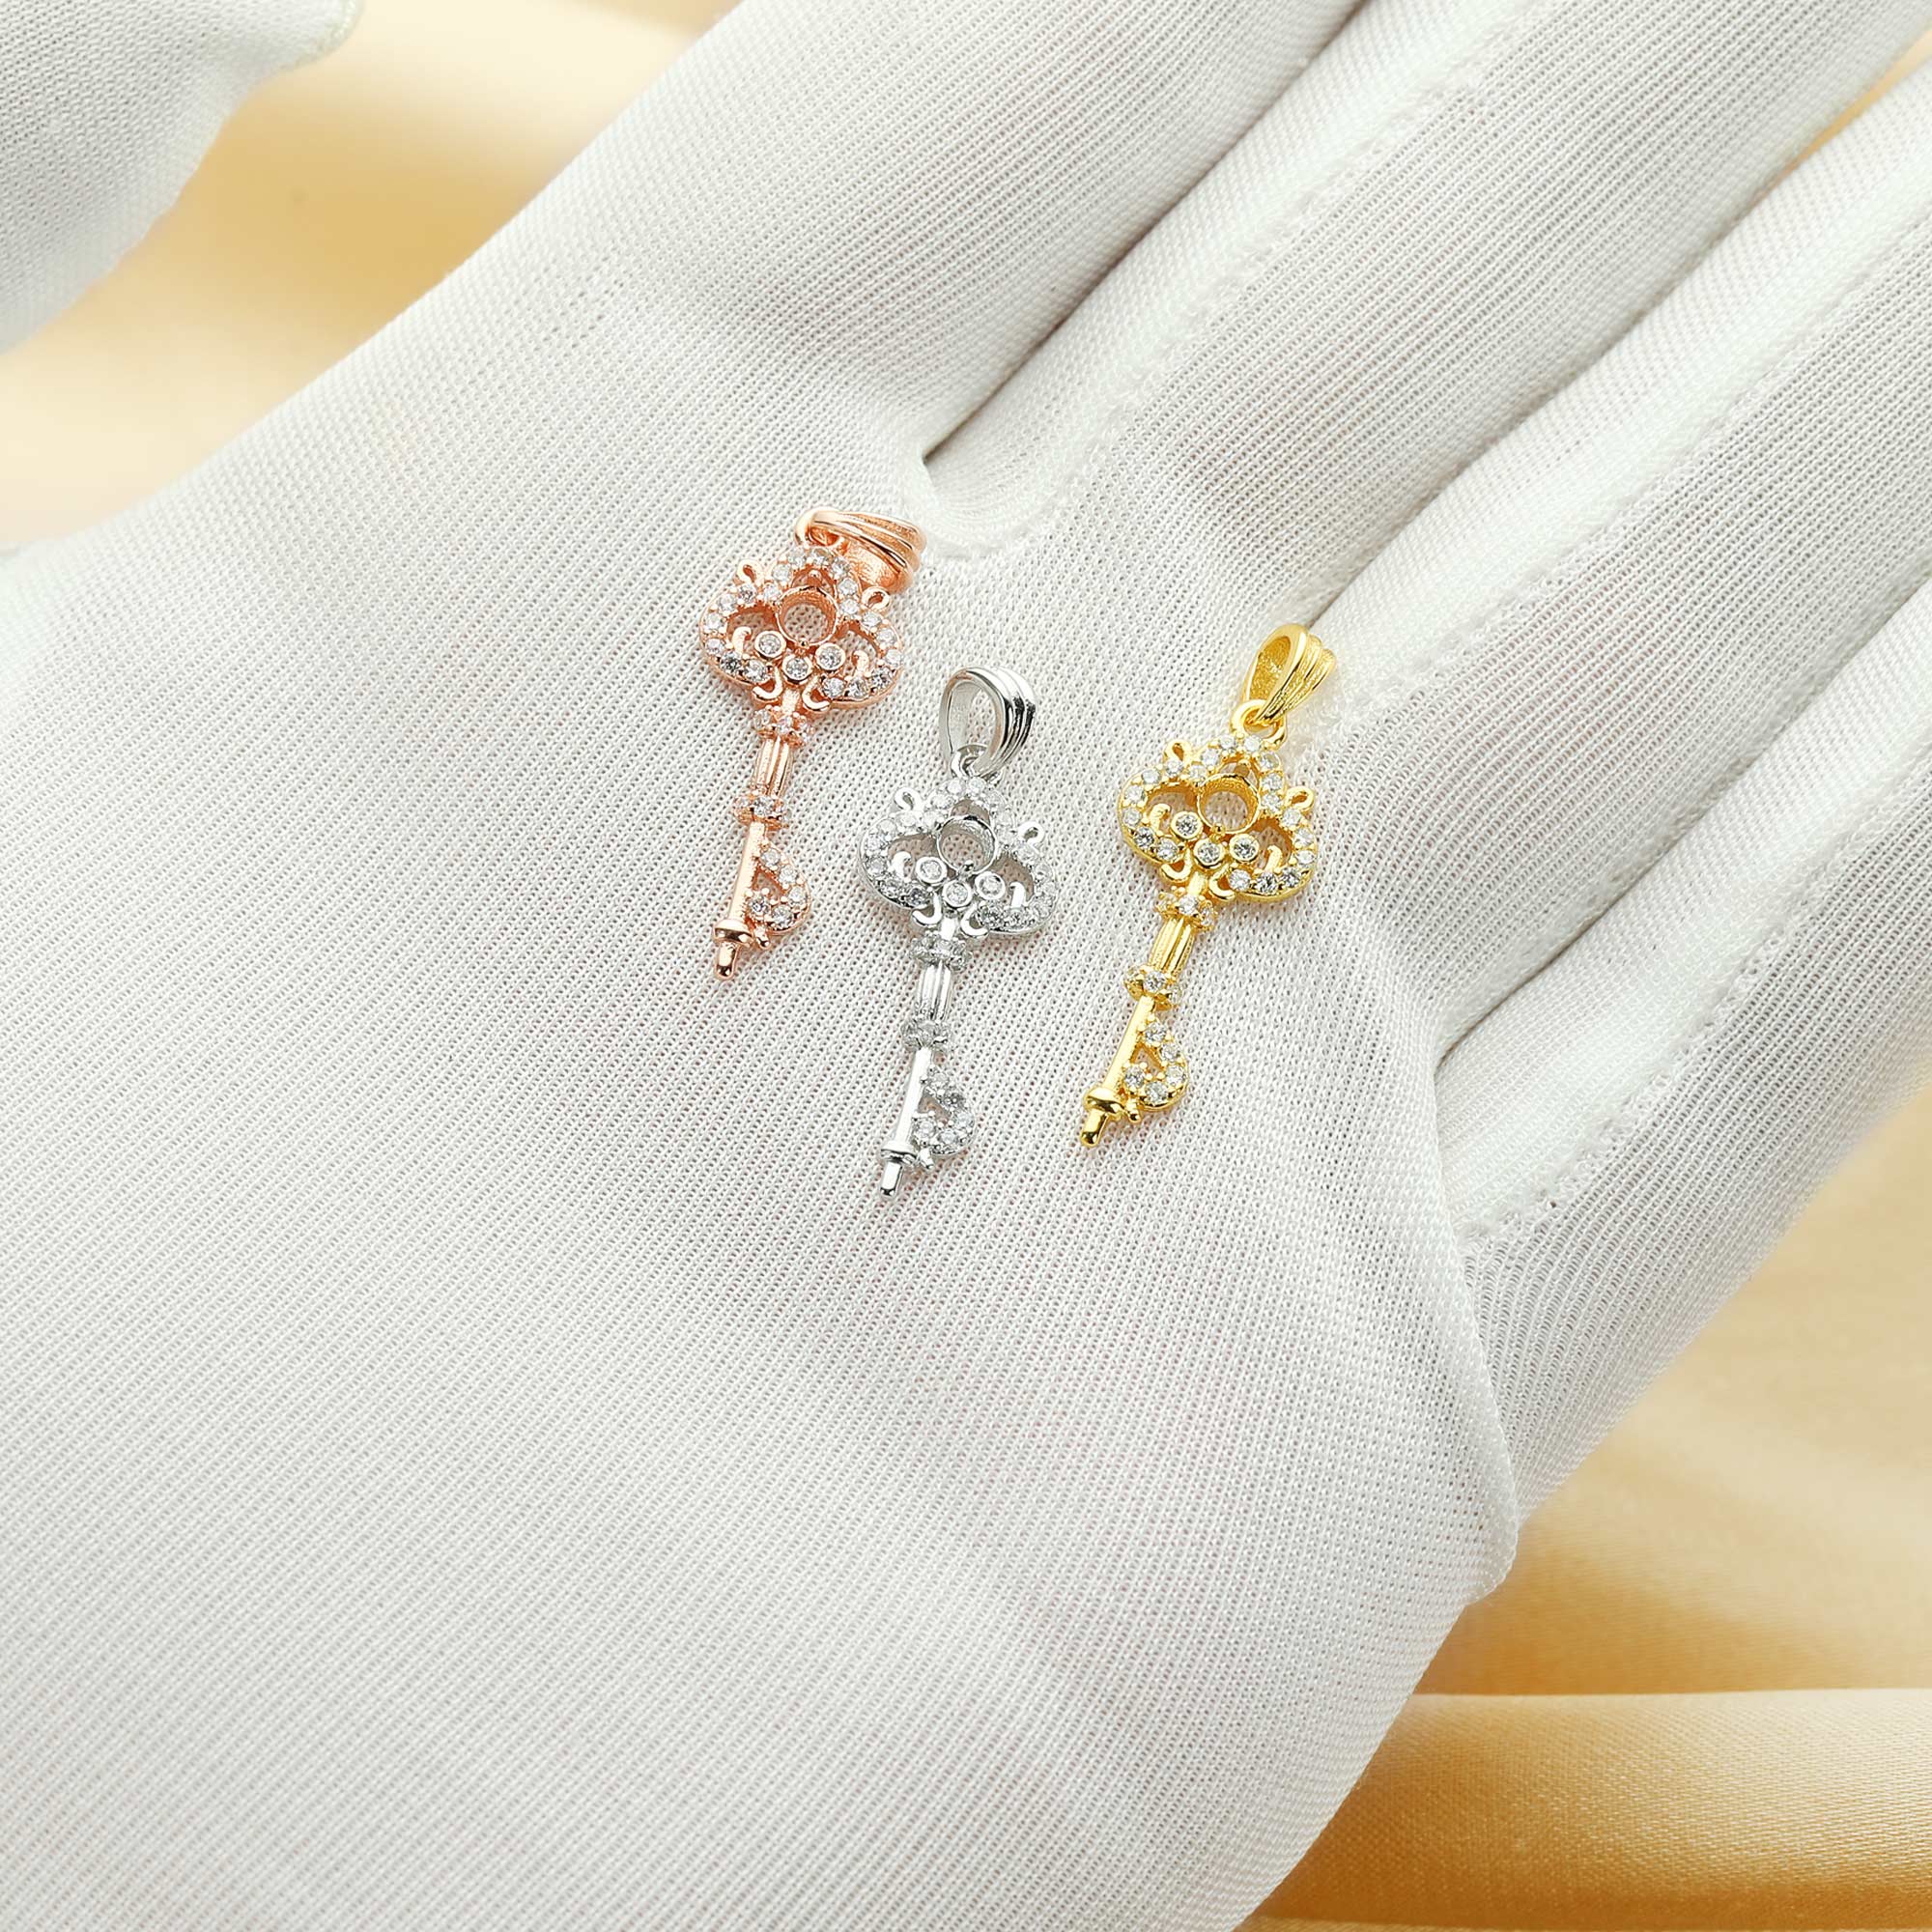 3MM Round Prong Pendant Settings,Vintage Key Pendant,Solid 925 Sterling Silver Rose Gold Plated Pendant Charm,DIY Jewelry Supplies 1411327 - Click Image to Close